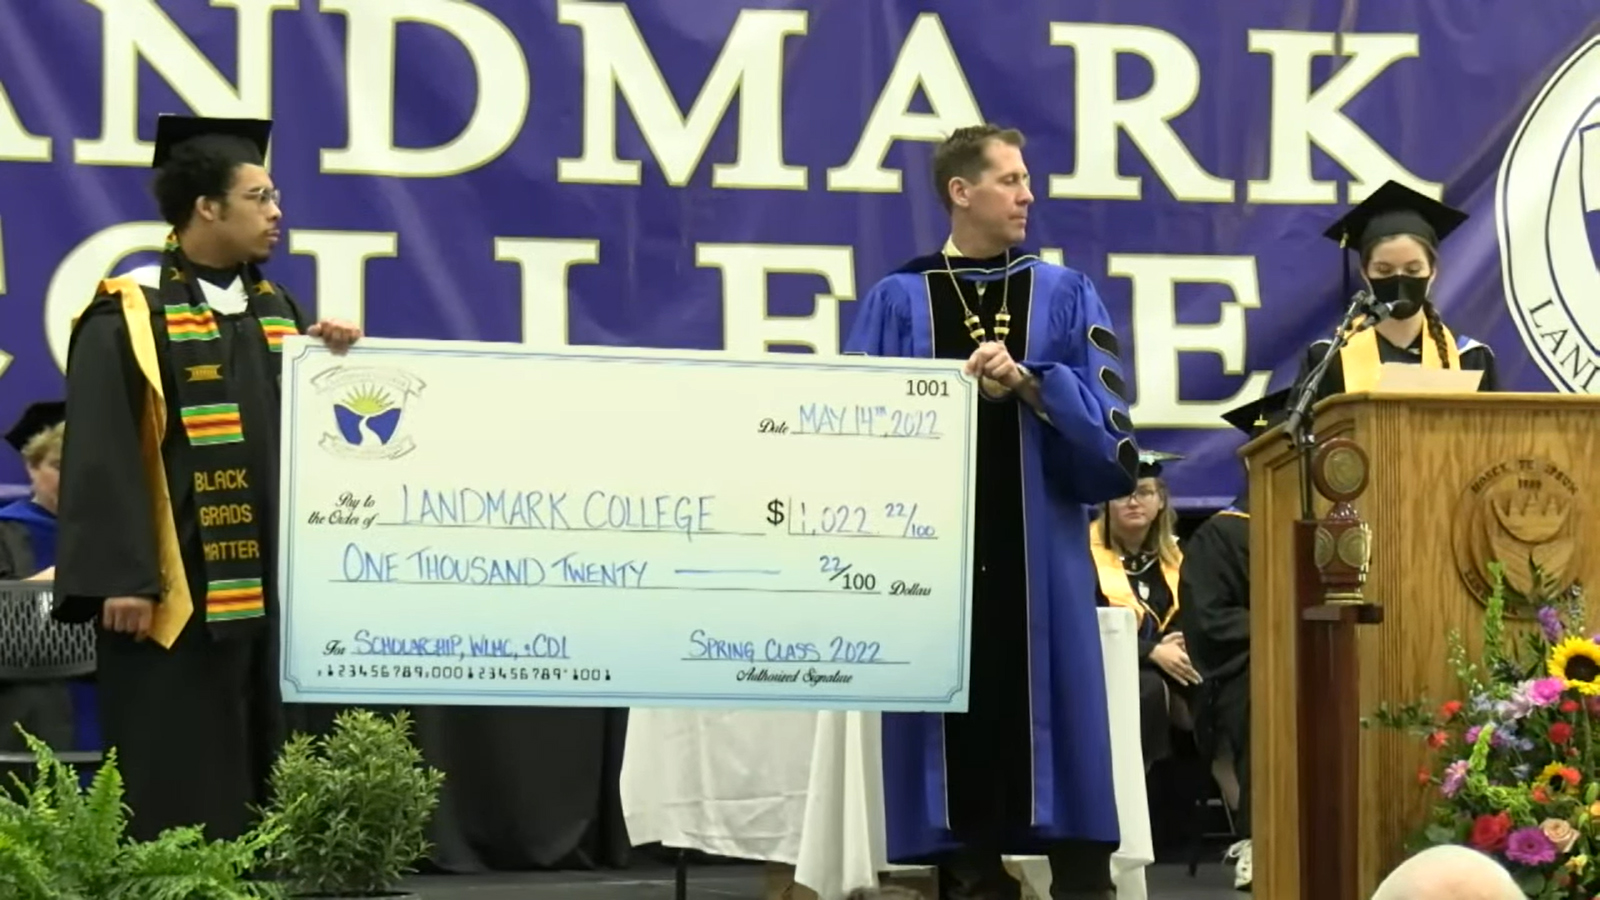 Image of student Carter Griffith and President Peter Eden, both in graduation regalia, standing on the commencement stage holding an oversized check in the amount of 1,022.22. They are both looking to their left  at student Meredith Robertson, who is making remarks at the podium while wearing a protective mask.